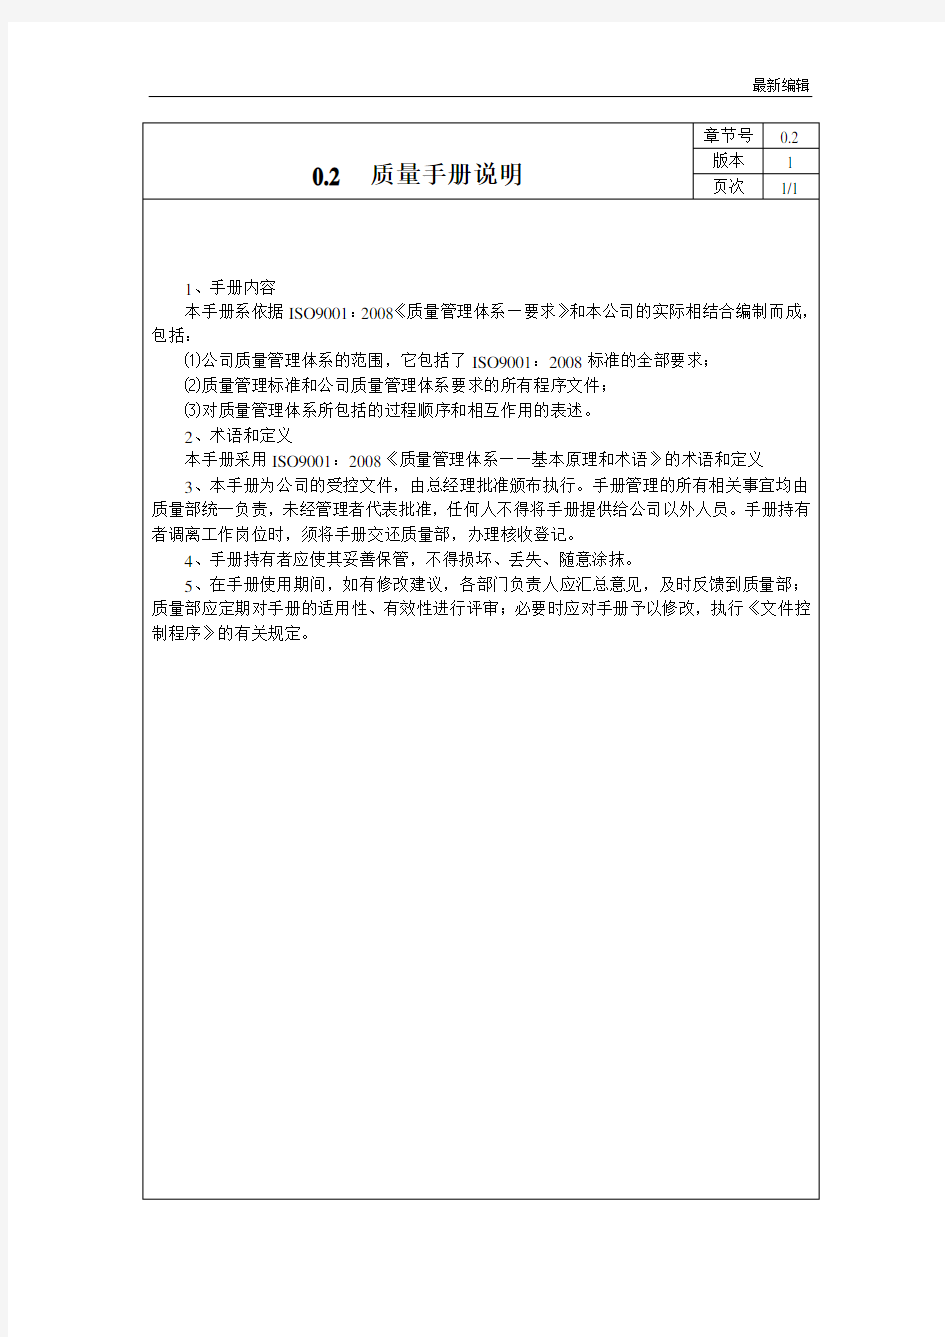 iso9001 质量手册说明